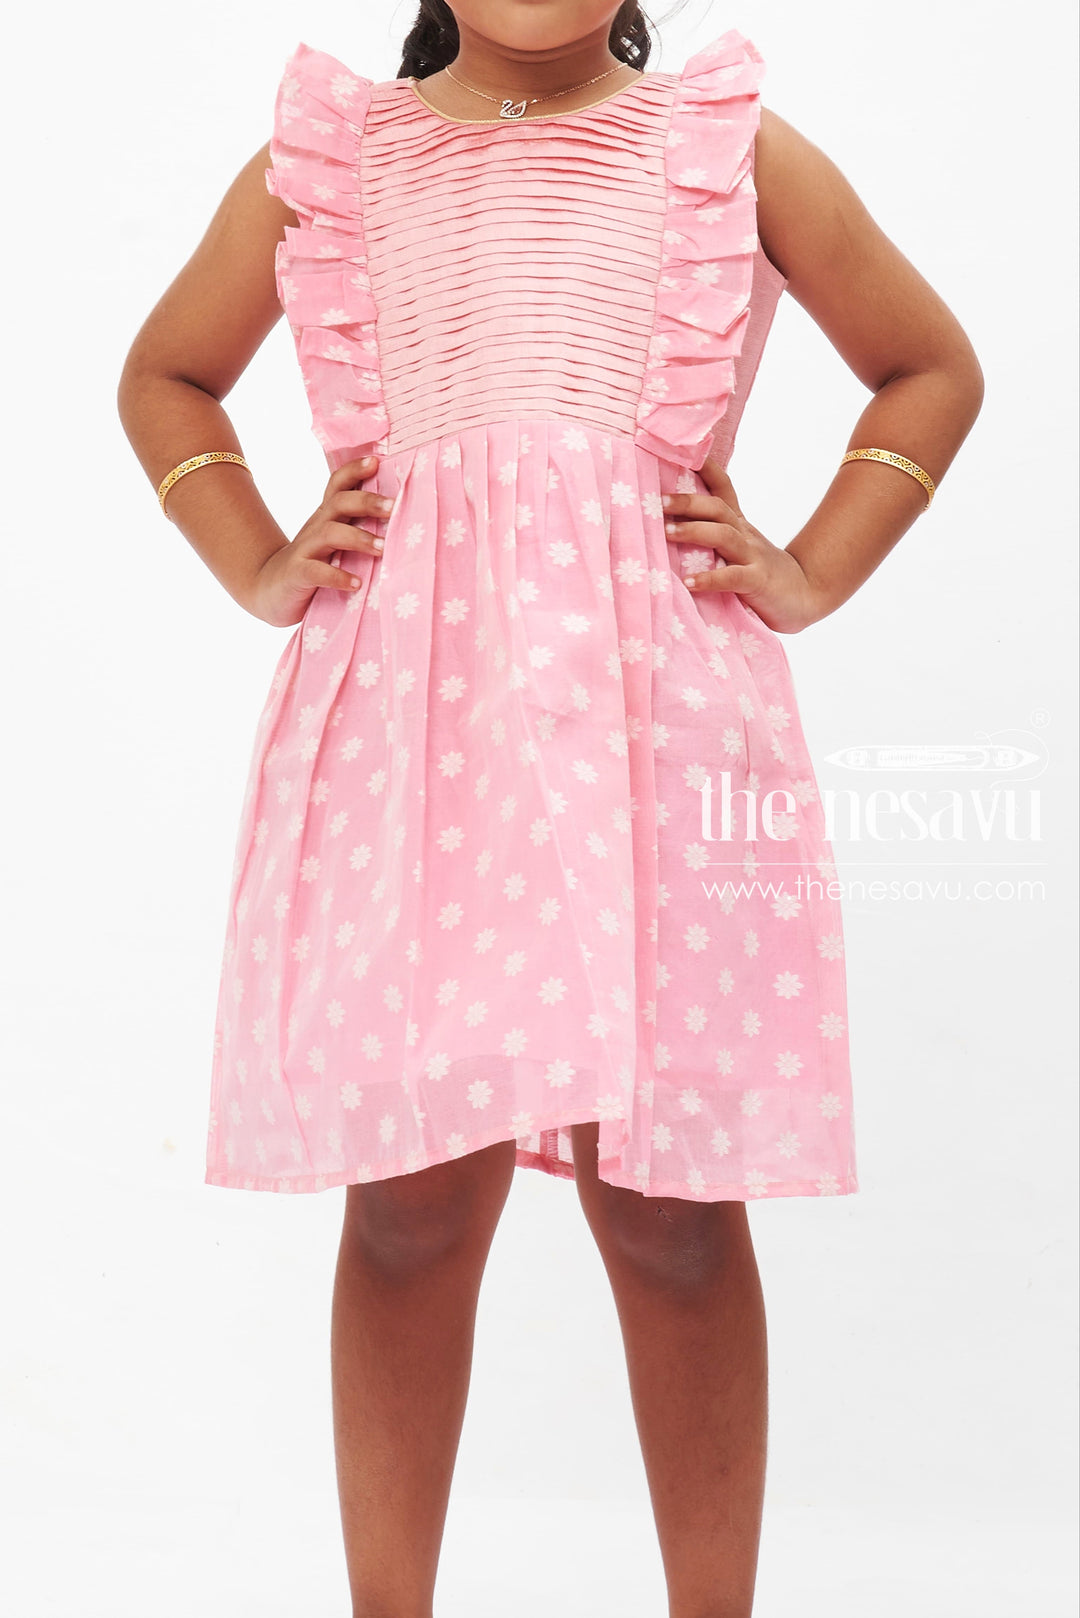 The Nesavu Baby Cotton Frocks Pretty in Pink Floral Accented Pleated Baby Frock for Girls Nesavu Girls Pink Pleated Floral Dress | Delicate Summer Style | The Nesavu